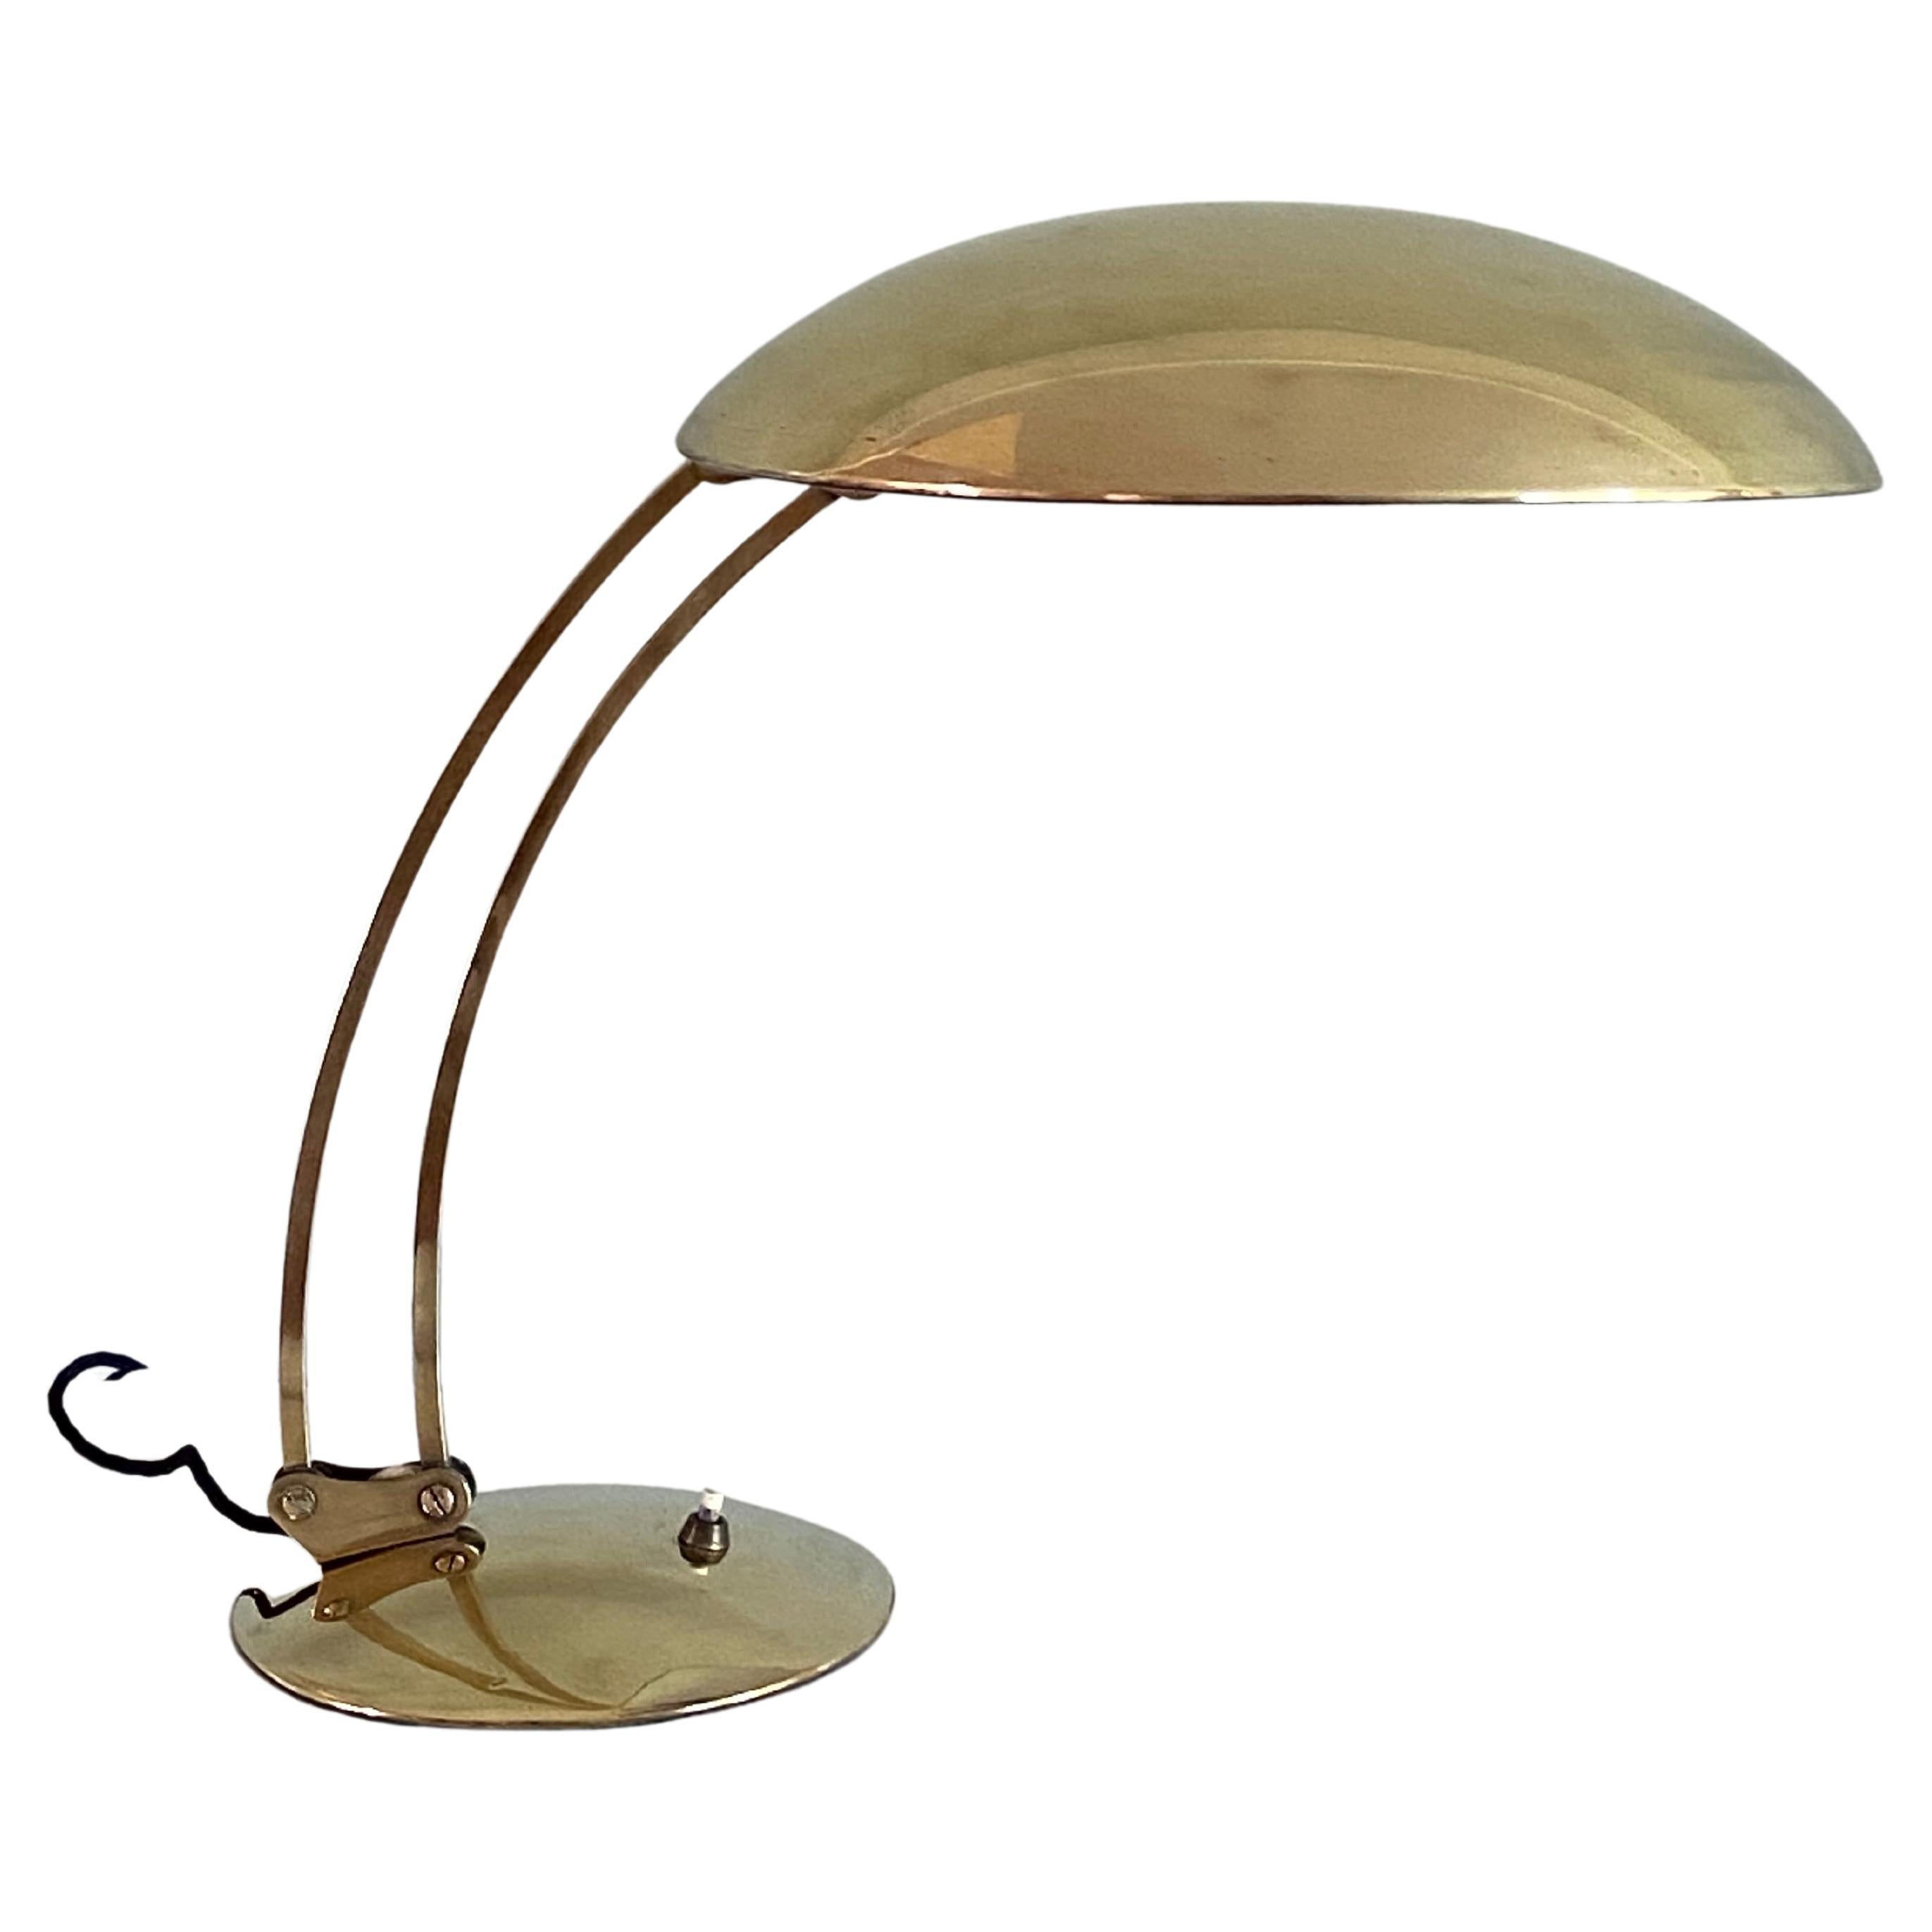 Polished Brass Christian Dell Table Lamp 6764 Desk Lamp by Kaiser Idell, Germany